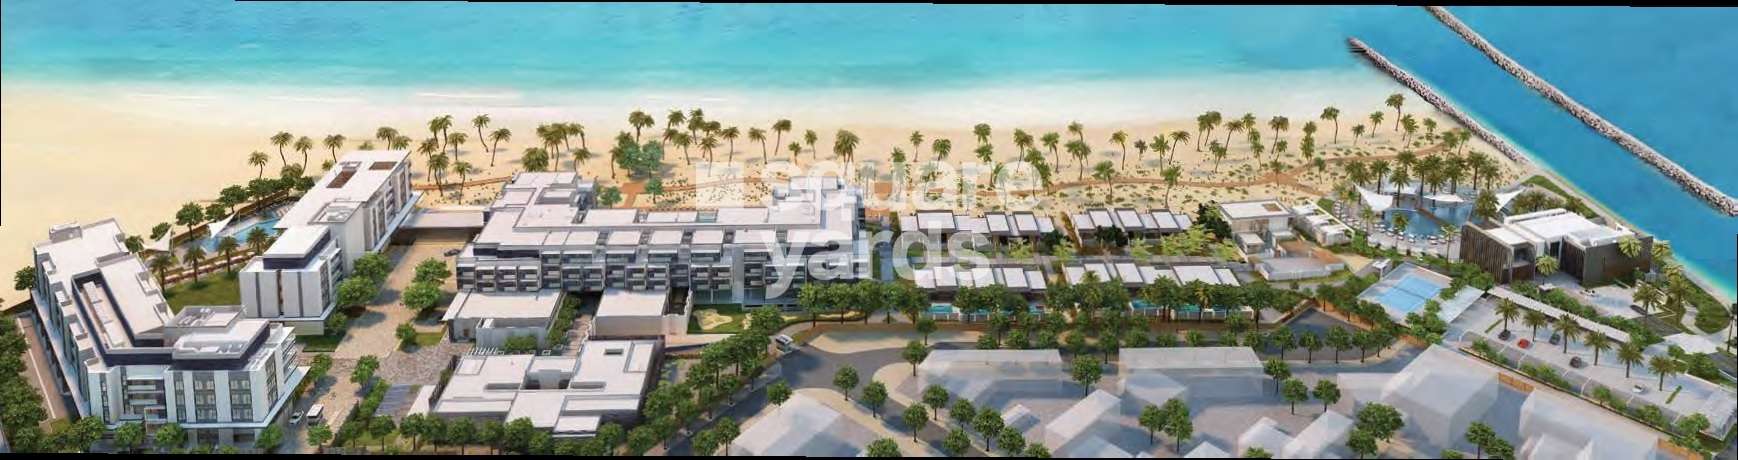 nikki beach residences project tower view1